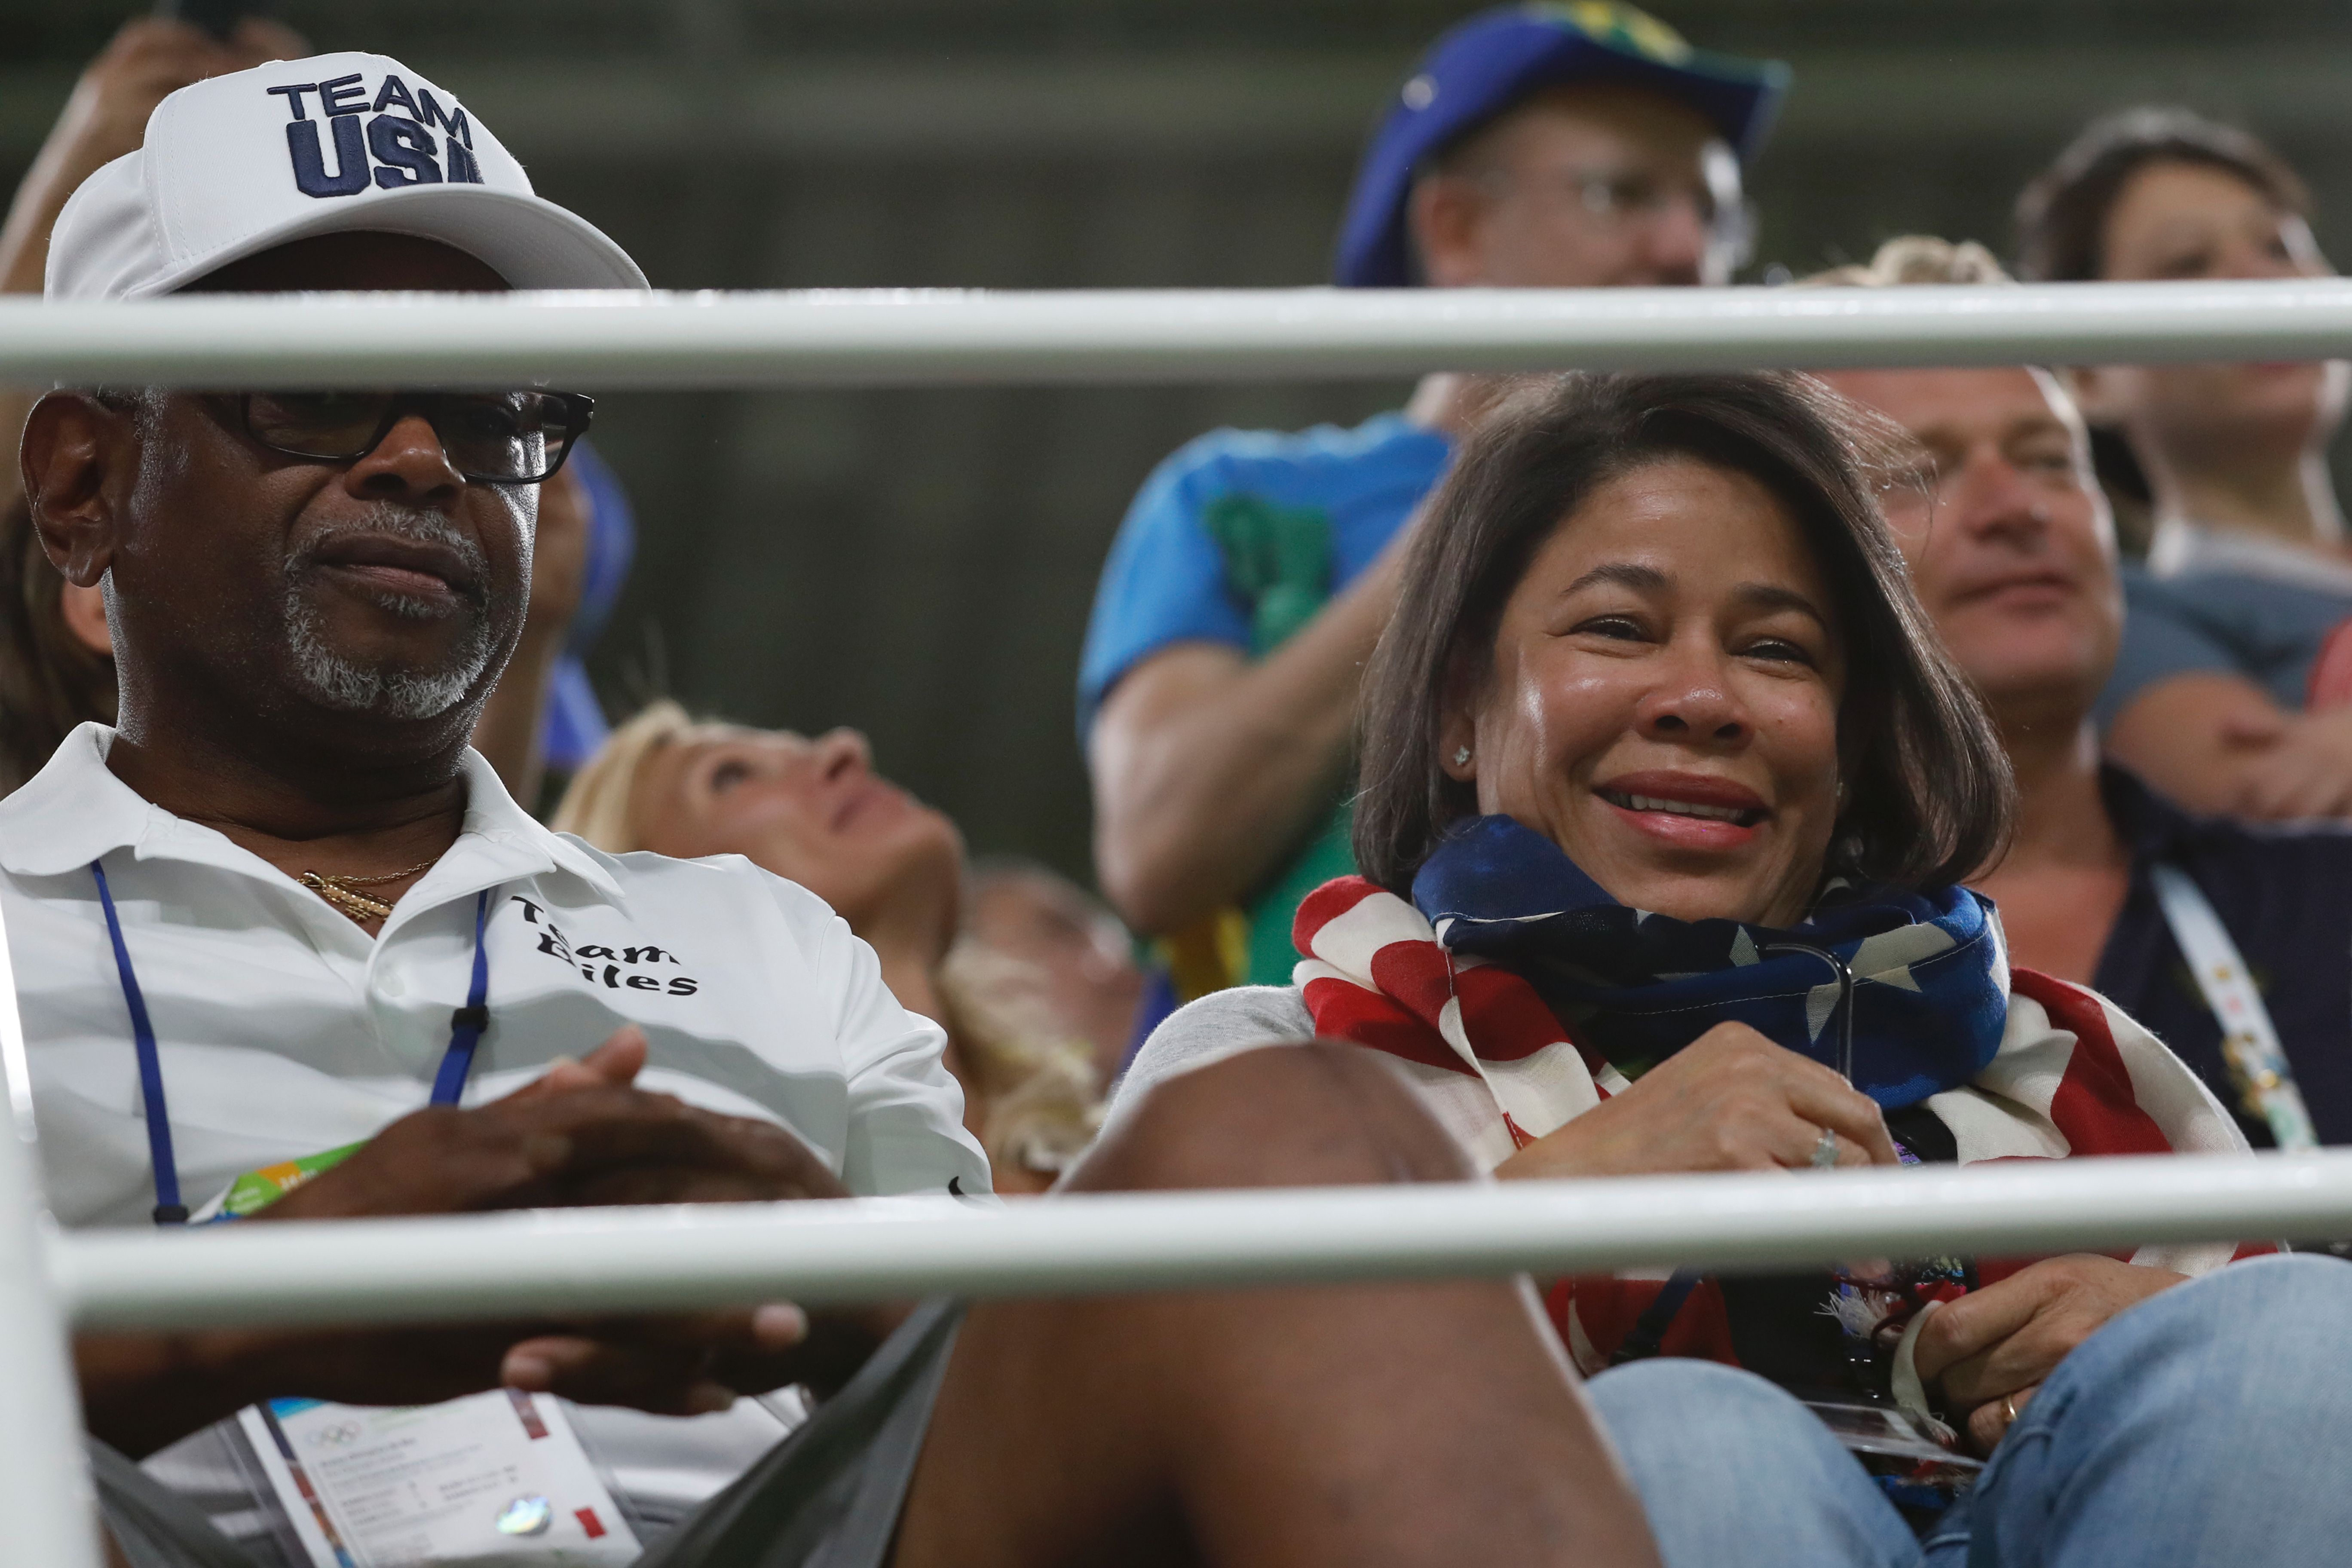 Simone Biles' grand parents attend the women's vault event final of the Artistic Gymnastics at the Olympic Arena during the Rio 2016 Olympic Games in Rio de Janeiro on August 14, 2016. | Source: Getty Images